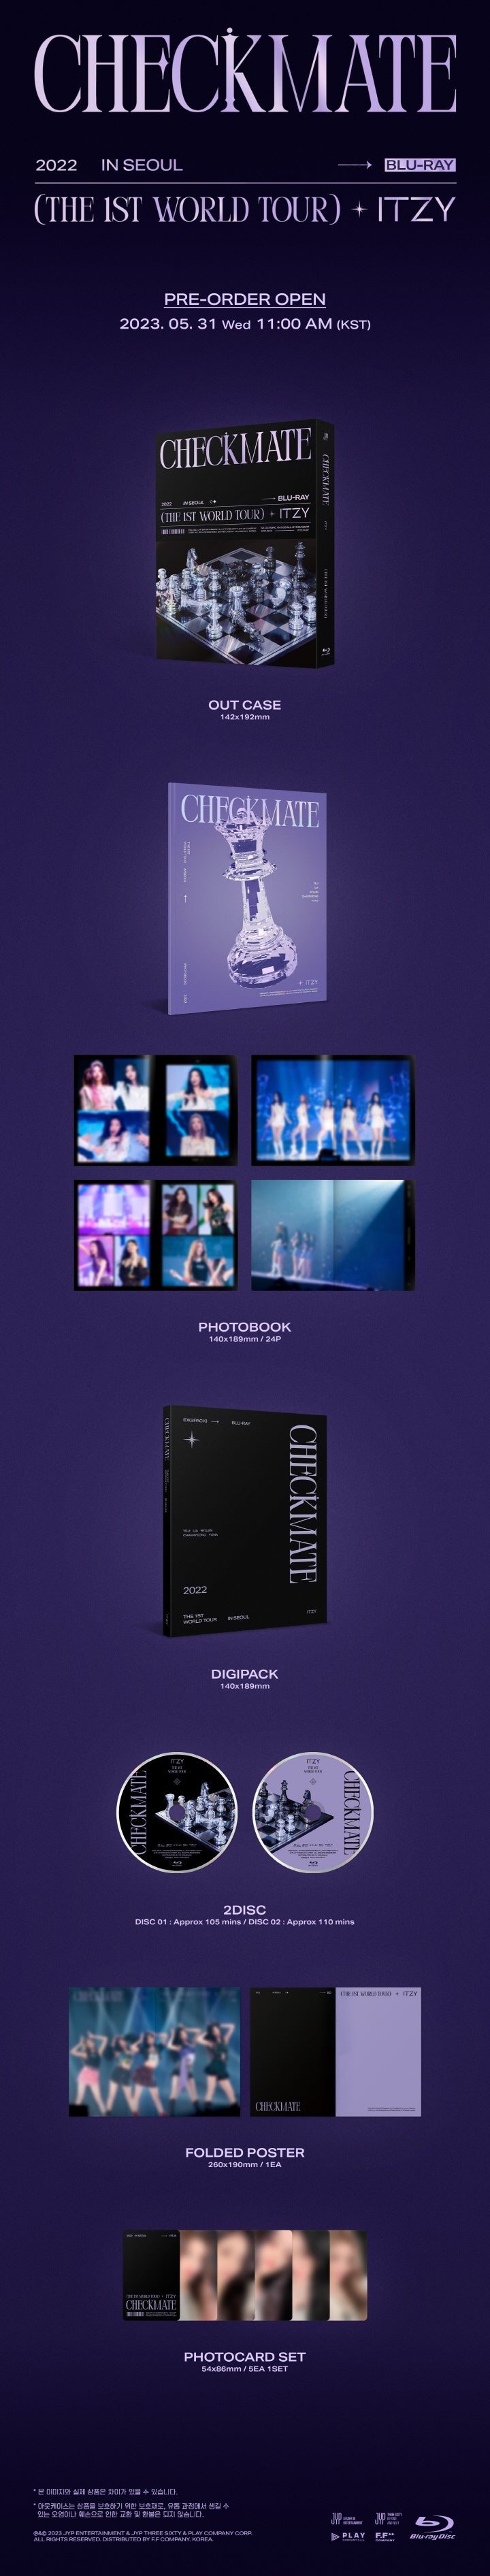 2 DISCs
1 Photobook (24 pages)
1 Folded Poster
5 Photo Cards